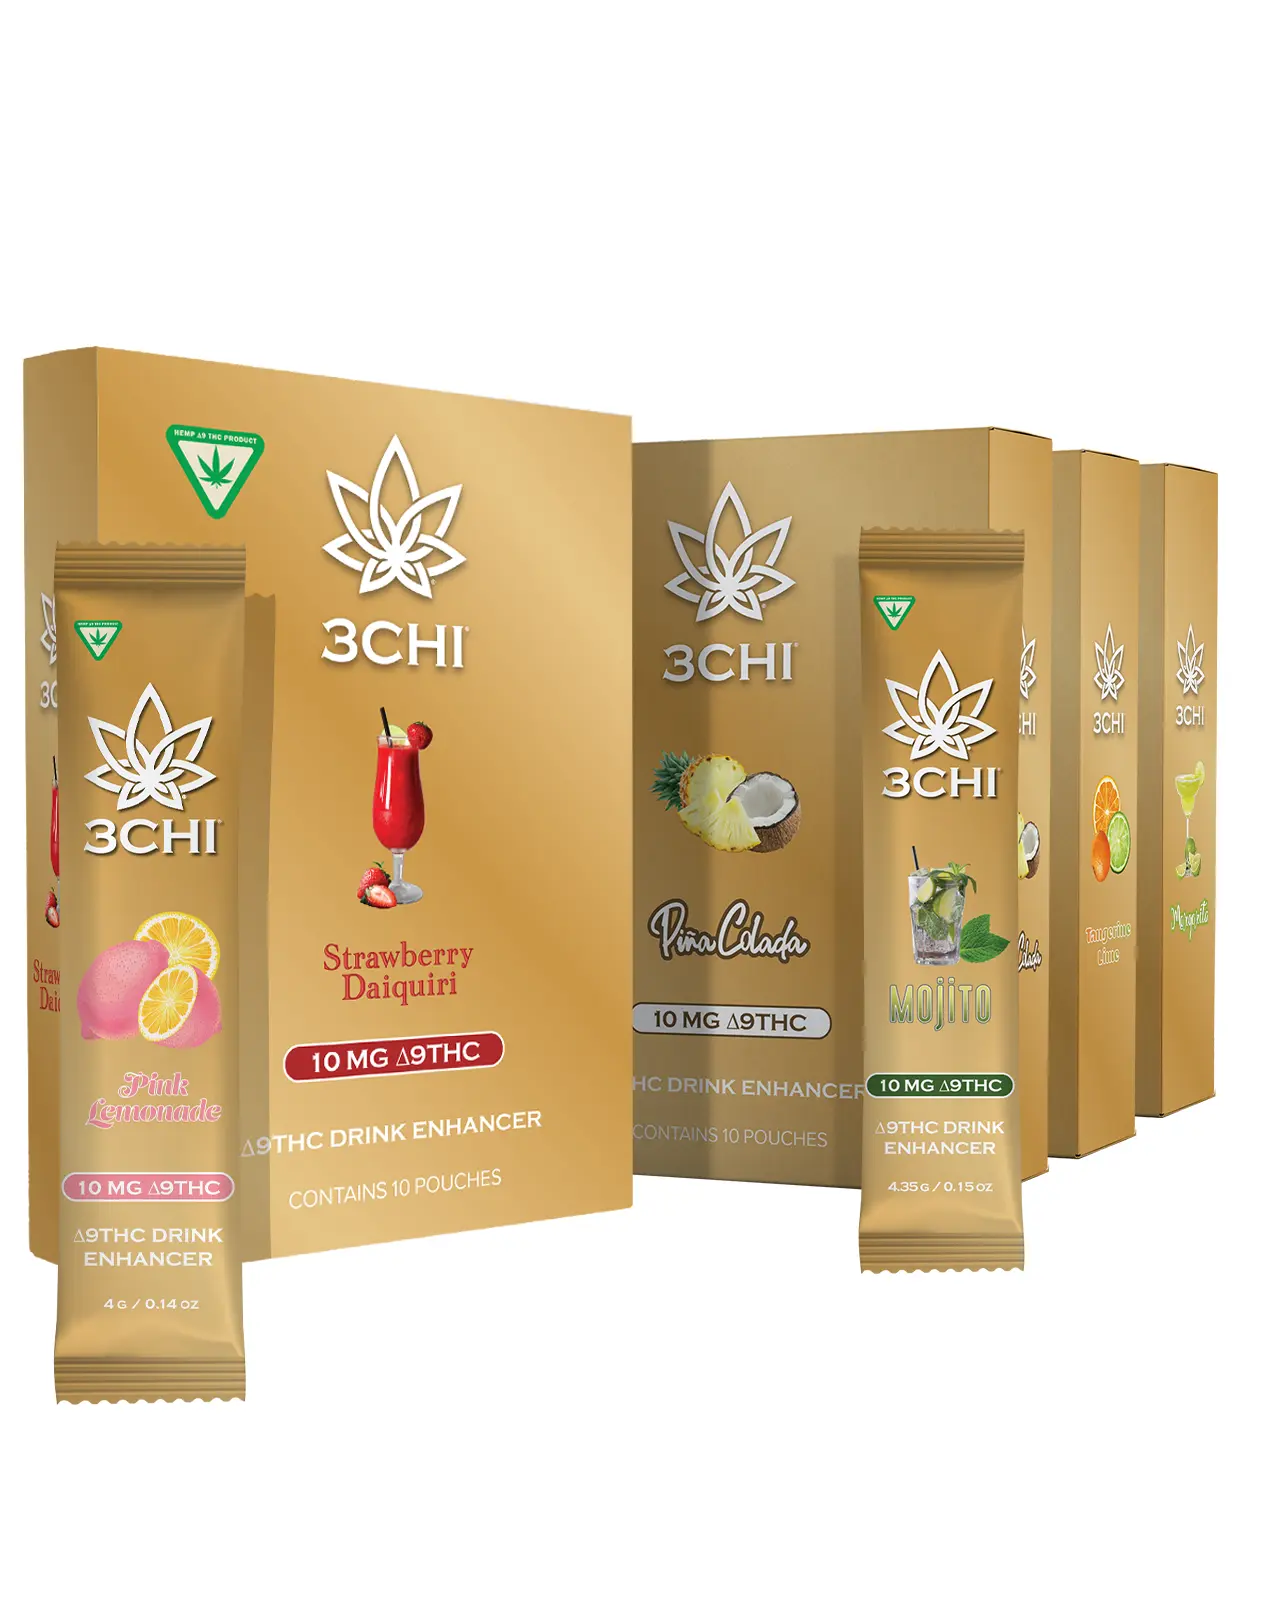 With natural flavors mixed with other ingredients, these refreshing flavors and non-alcoholic cannabis drinks are perfect for social gatherings. Whether you enjoy recreational marijuana or want potential wellness benefits consuming THC and CBD in a THC beverage form has become increasingly popular.